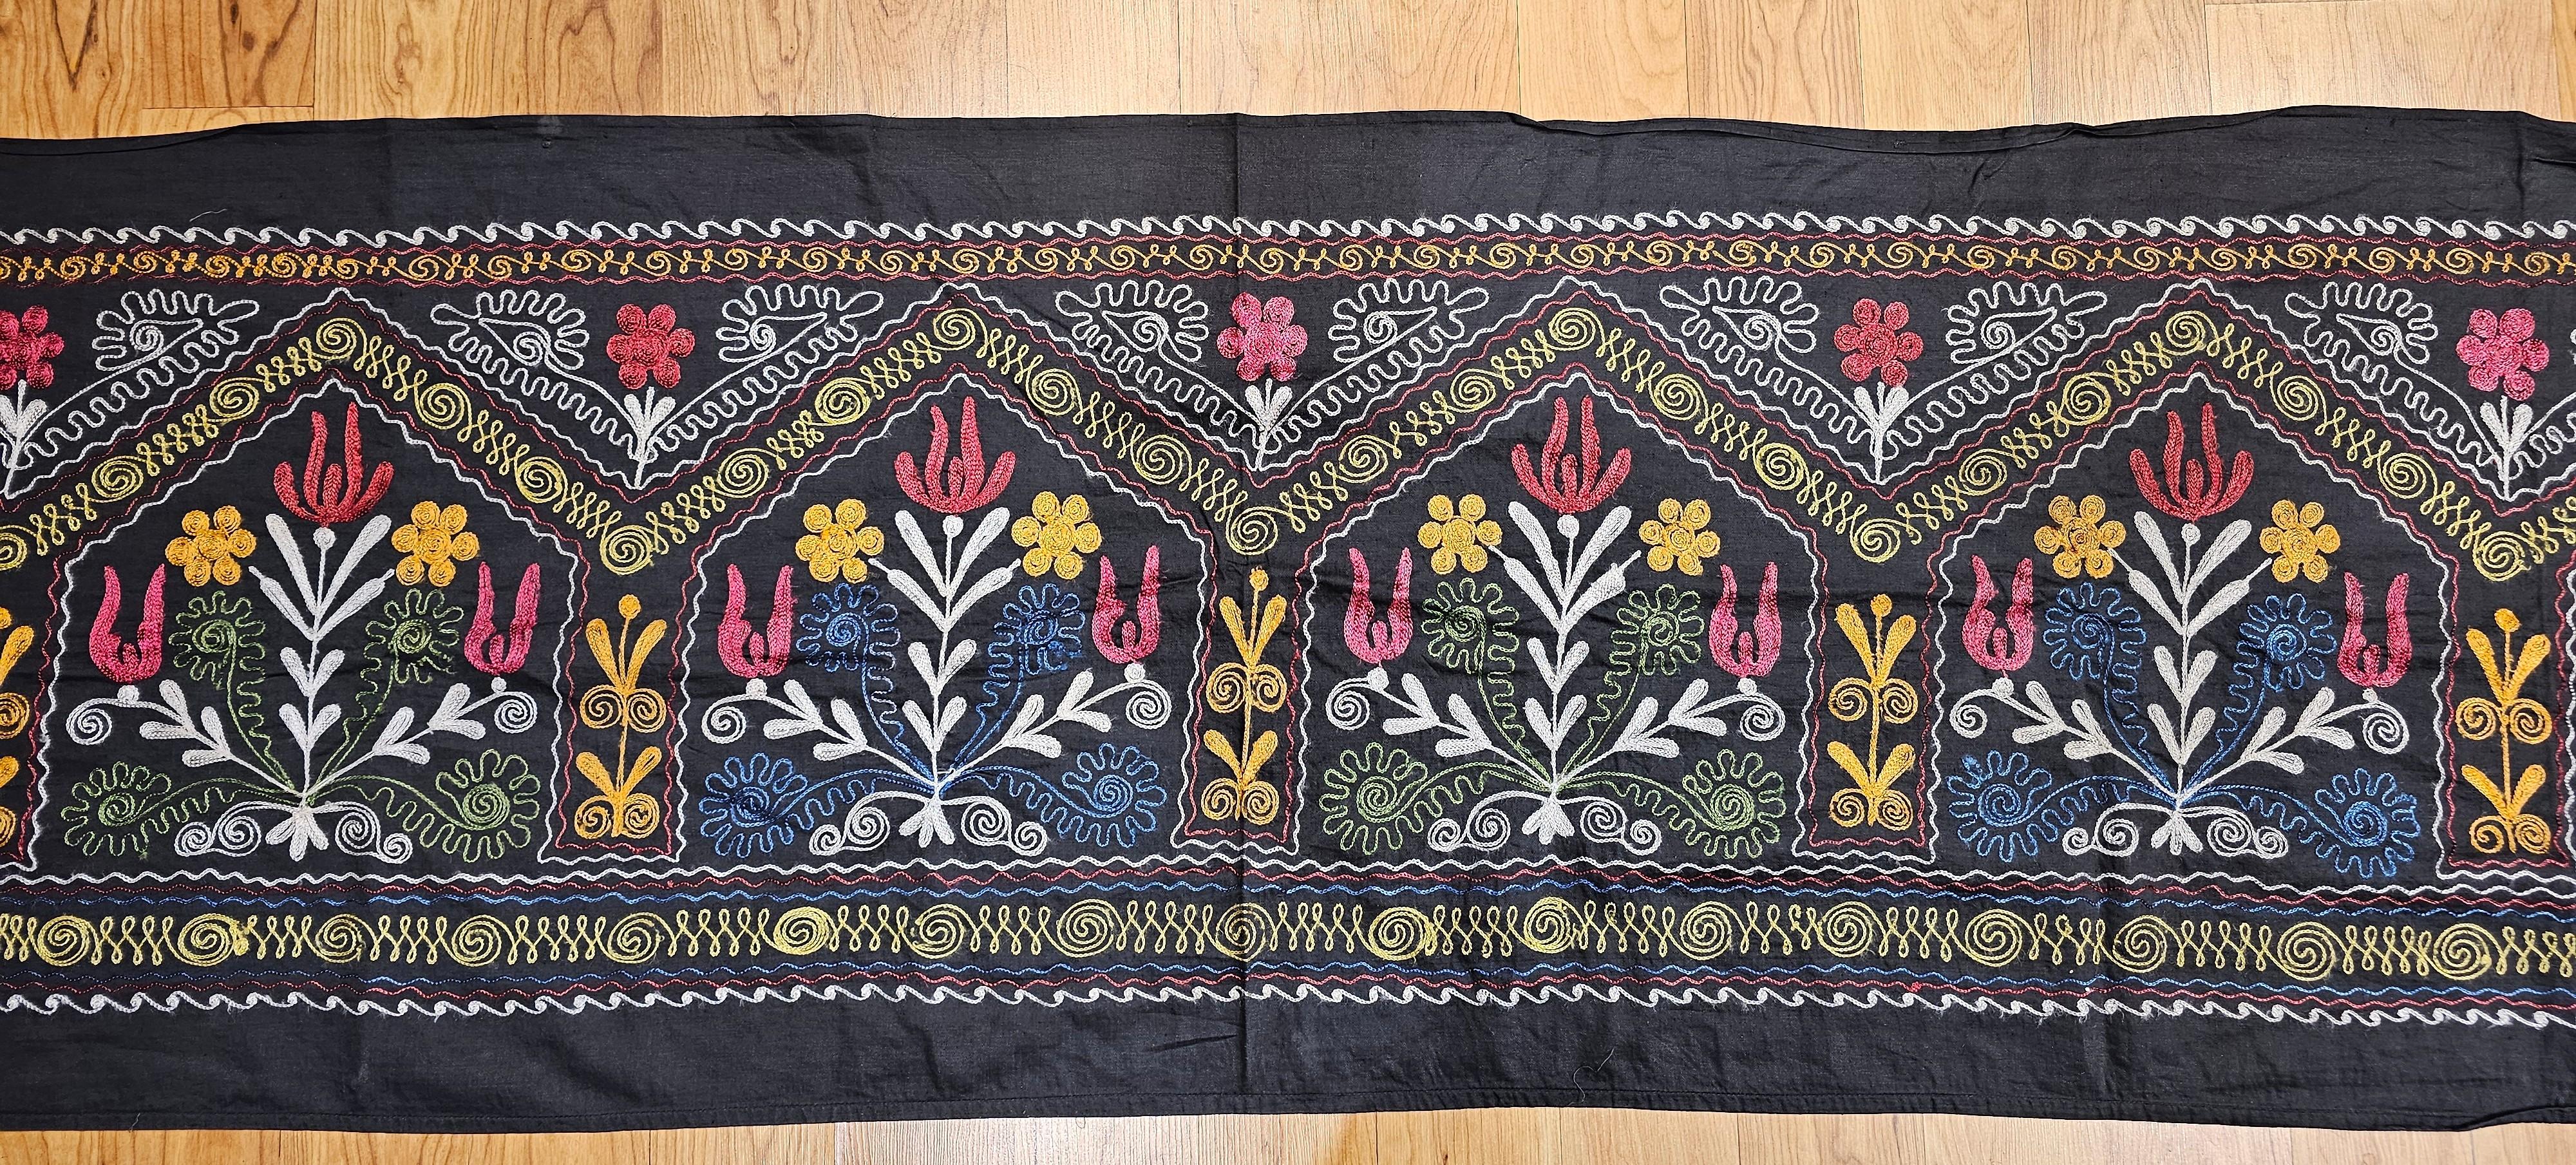 Cotton Vintage Uzbek Suzani Silk Embroidery in Black, Blue, Green, Ivory, Yellow, Red For Sale